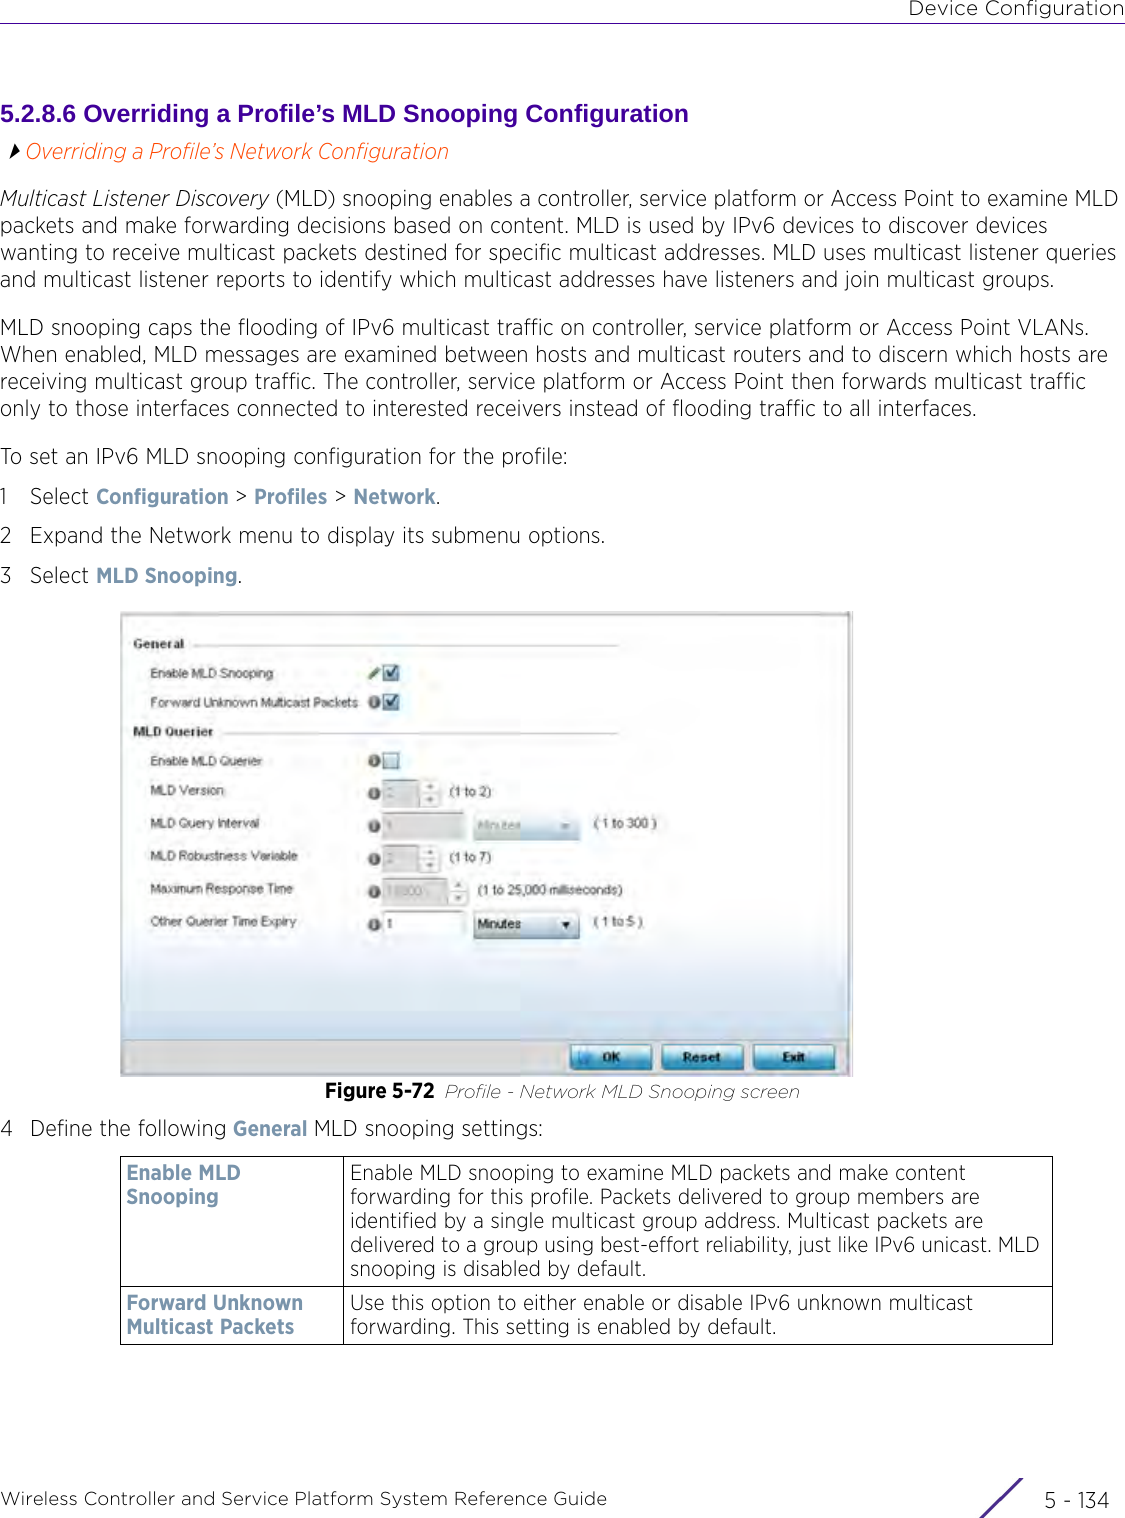 Device ConfigurationWireless Controller and Service Platform System Reference Guide  5 - 1345.2.8.6 Overriding a Profile’s MLD Snooping ConfigurationOverriding a Profile’s Network ConfigurationMulticast Listener Discovery (MLD) snooping enables a controller, service platform or Access Point to examine MLD packets and make forwarding decisions based on content. MLD is used by IPv6 devices to discover devices wanting to receive multicast packets destined for specific multicast addresses. MLD uses multicast listener queries and multicast listener reports to identify which multicast addresses have listeners and join multicast groups.MLD snooping caps the flooding of IPv6 multicast traffic on controller, service platform or Access Point VLANs. When enabled, MLD messages are examined between hosts and multicast routers and to discern which hosts are receiving multicast group traffic. The controller, service platform or Access Point then forwards multicast traffic only to those interfaces connected to interested receivers instead of flooding traffic to all interfaces.To set an IPv6 MLD snooping configuration for the profile:1Select Configuration &gt; Profiles &gt; Network.2 Expand the Network menu to display its submenu options.3Select MLD Snooping. Figure 5-72 Profile - Network MLD Snooping screen4 Define the following General MLD snooping settings:Enable MLD SnoopingEnable MLD snooping to examine MLD packets and make content forwarding for this profile. Packets delivered to group members are identified by a single multicast group address. Multicast packets are delivered to a group using best-effort reliability, just like IPv6 unicast. MLD snooping is disabled by default.Forward Unknown Multicast PacketsUse this option to either enable or disable IPv6 unknown multicast forwarding. This setting is enabled by default.